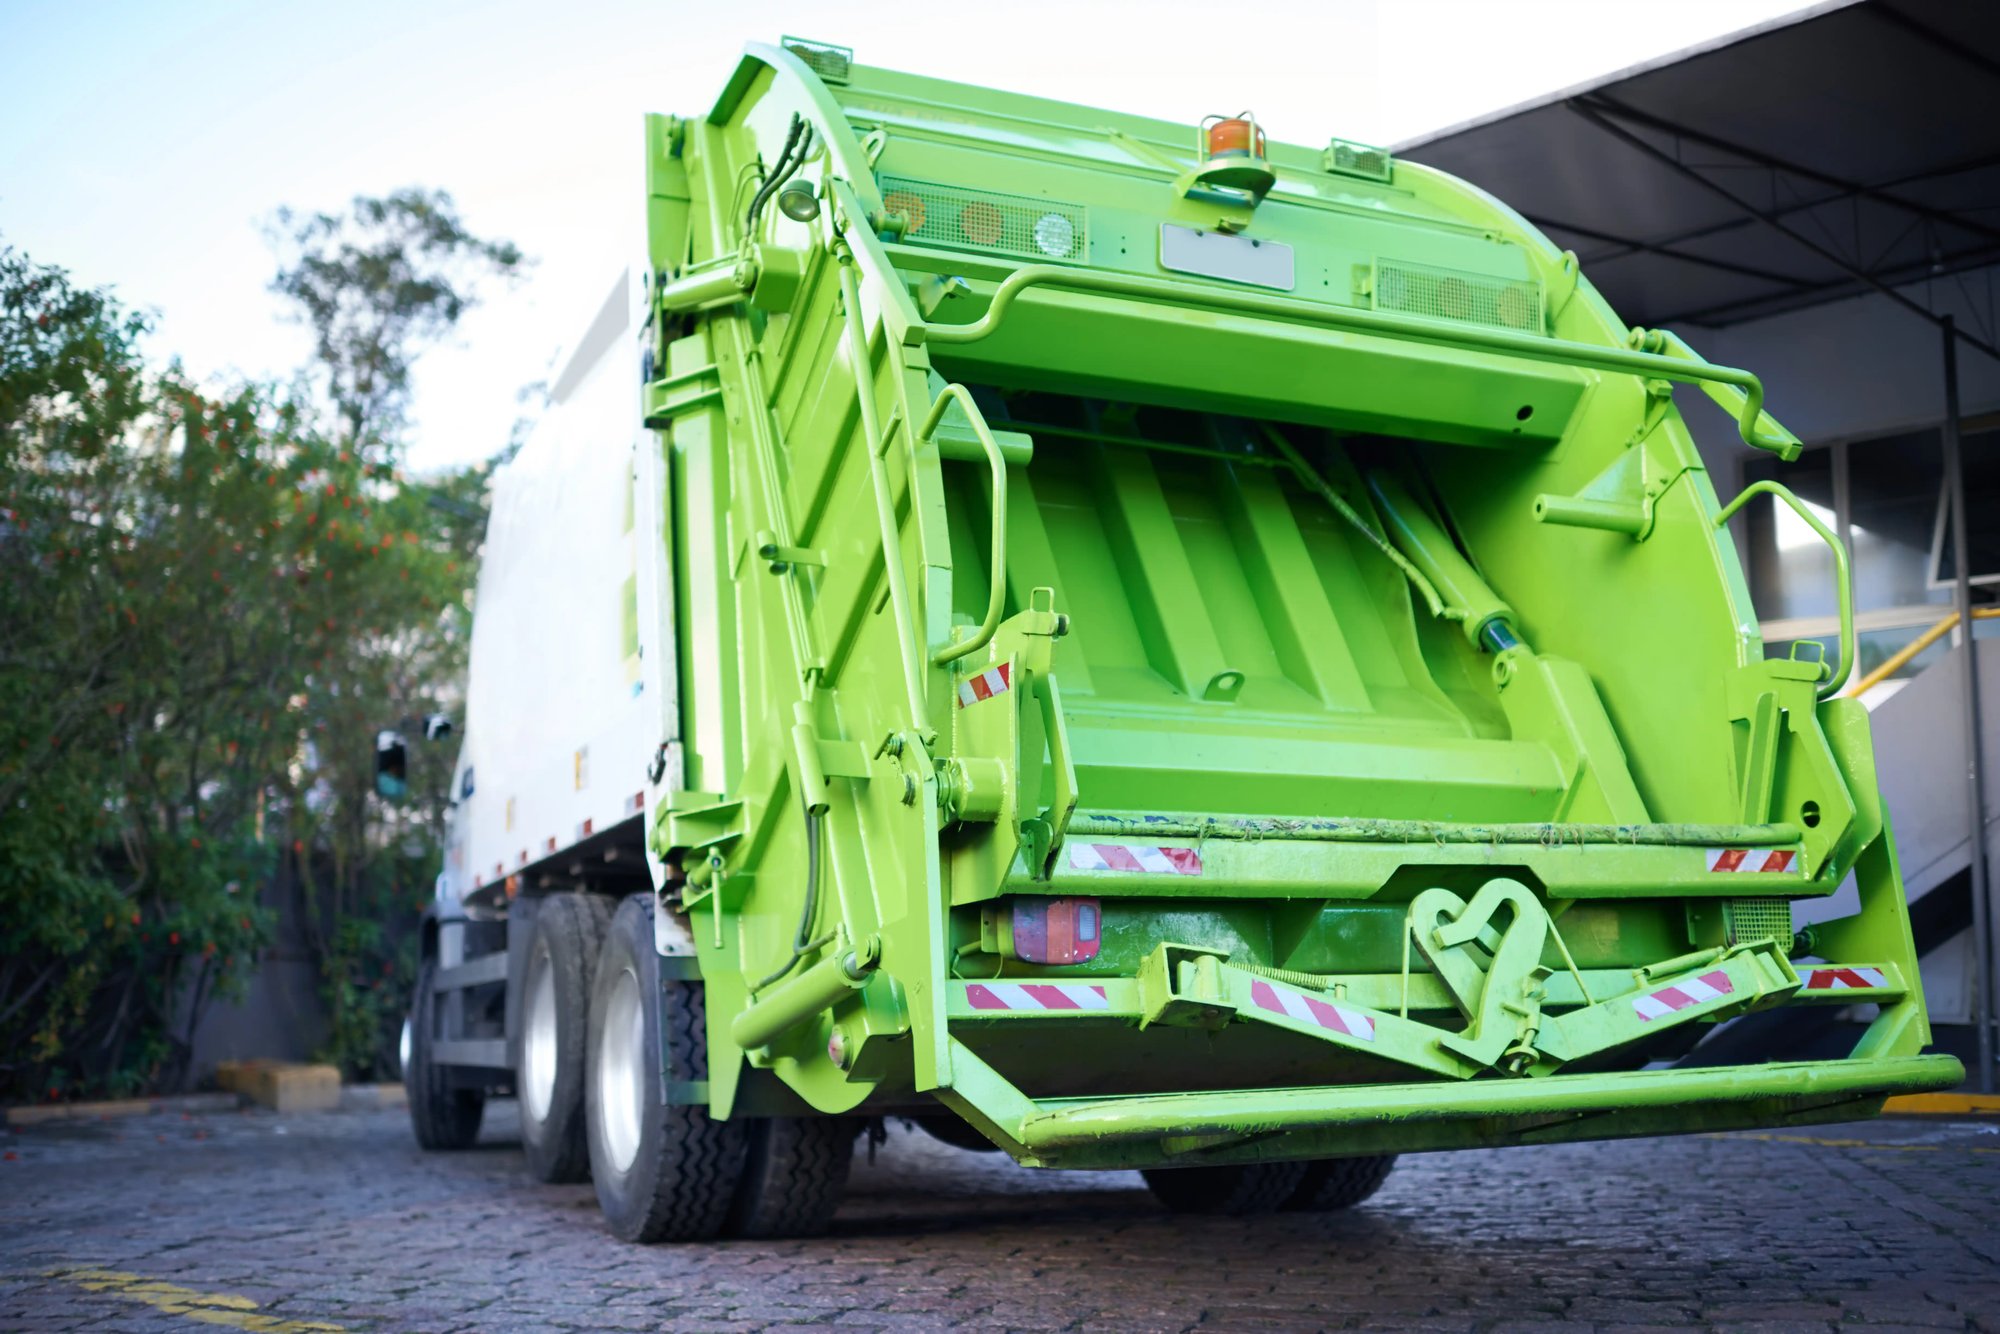 a green garbage truck parked on a brick road